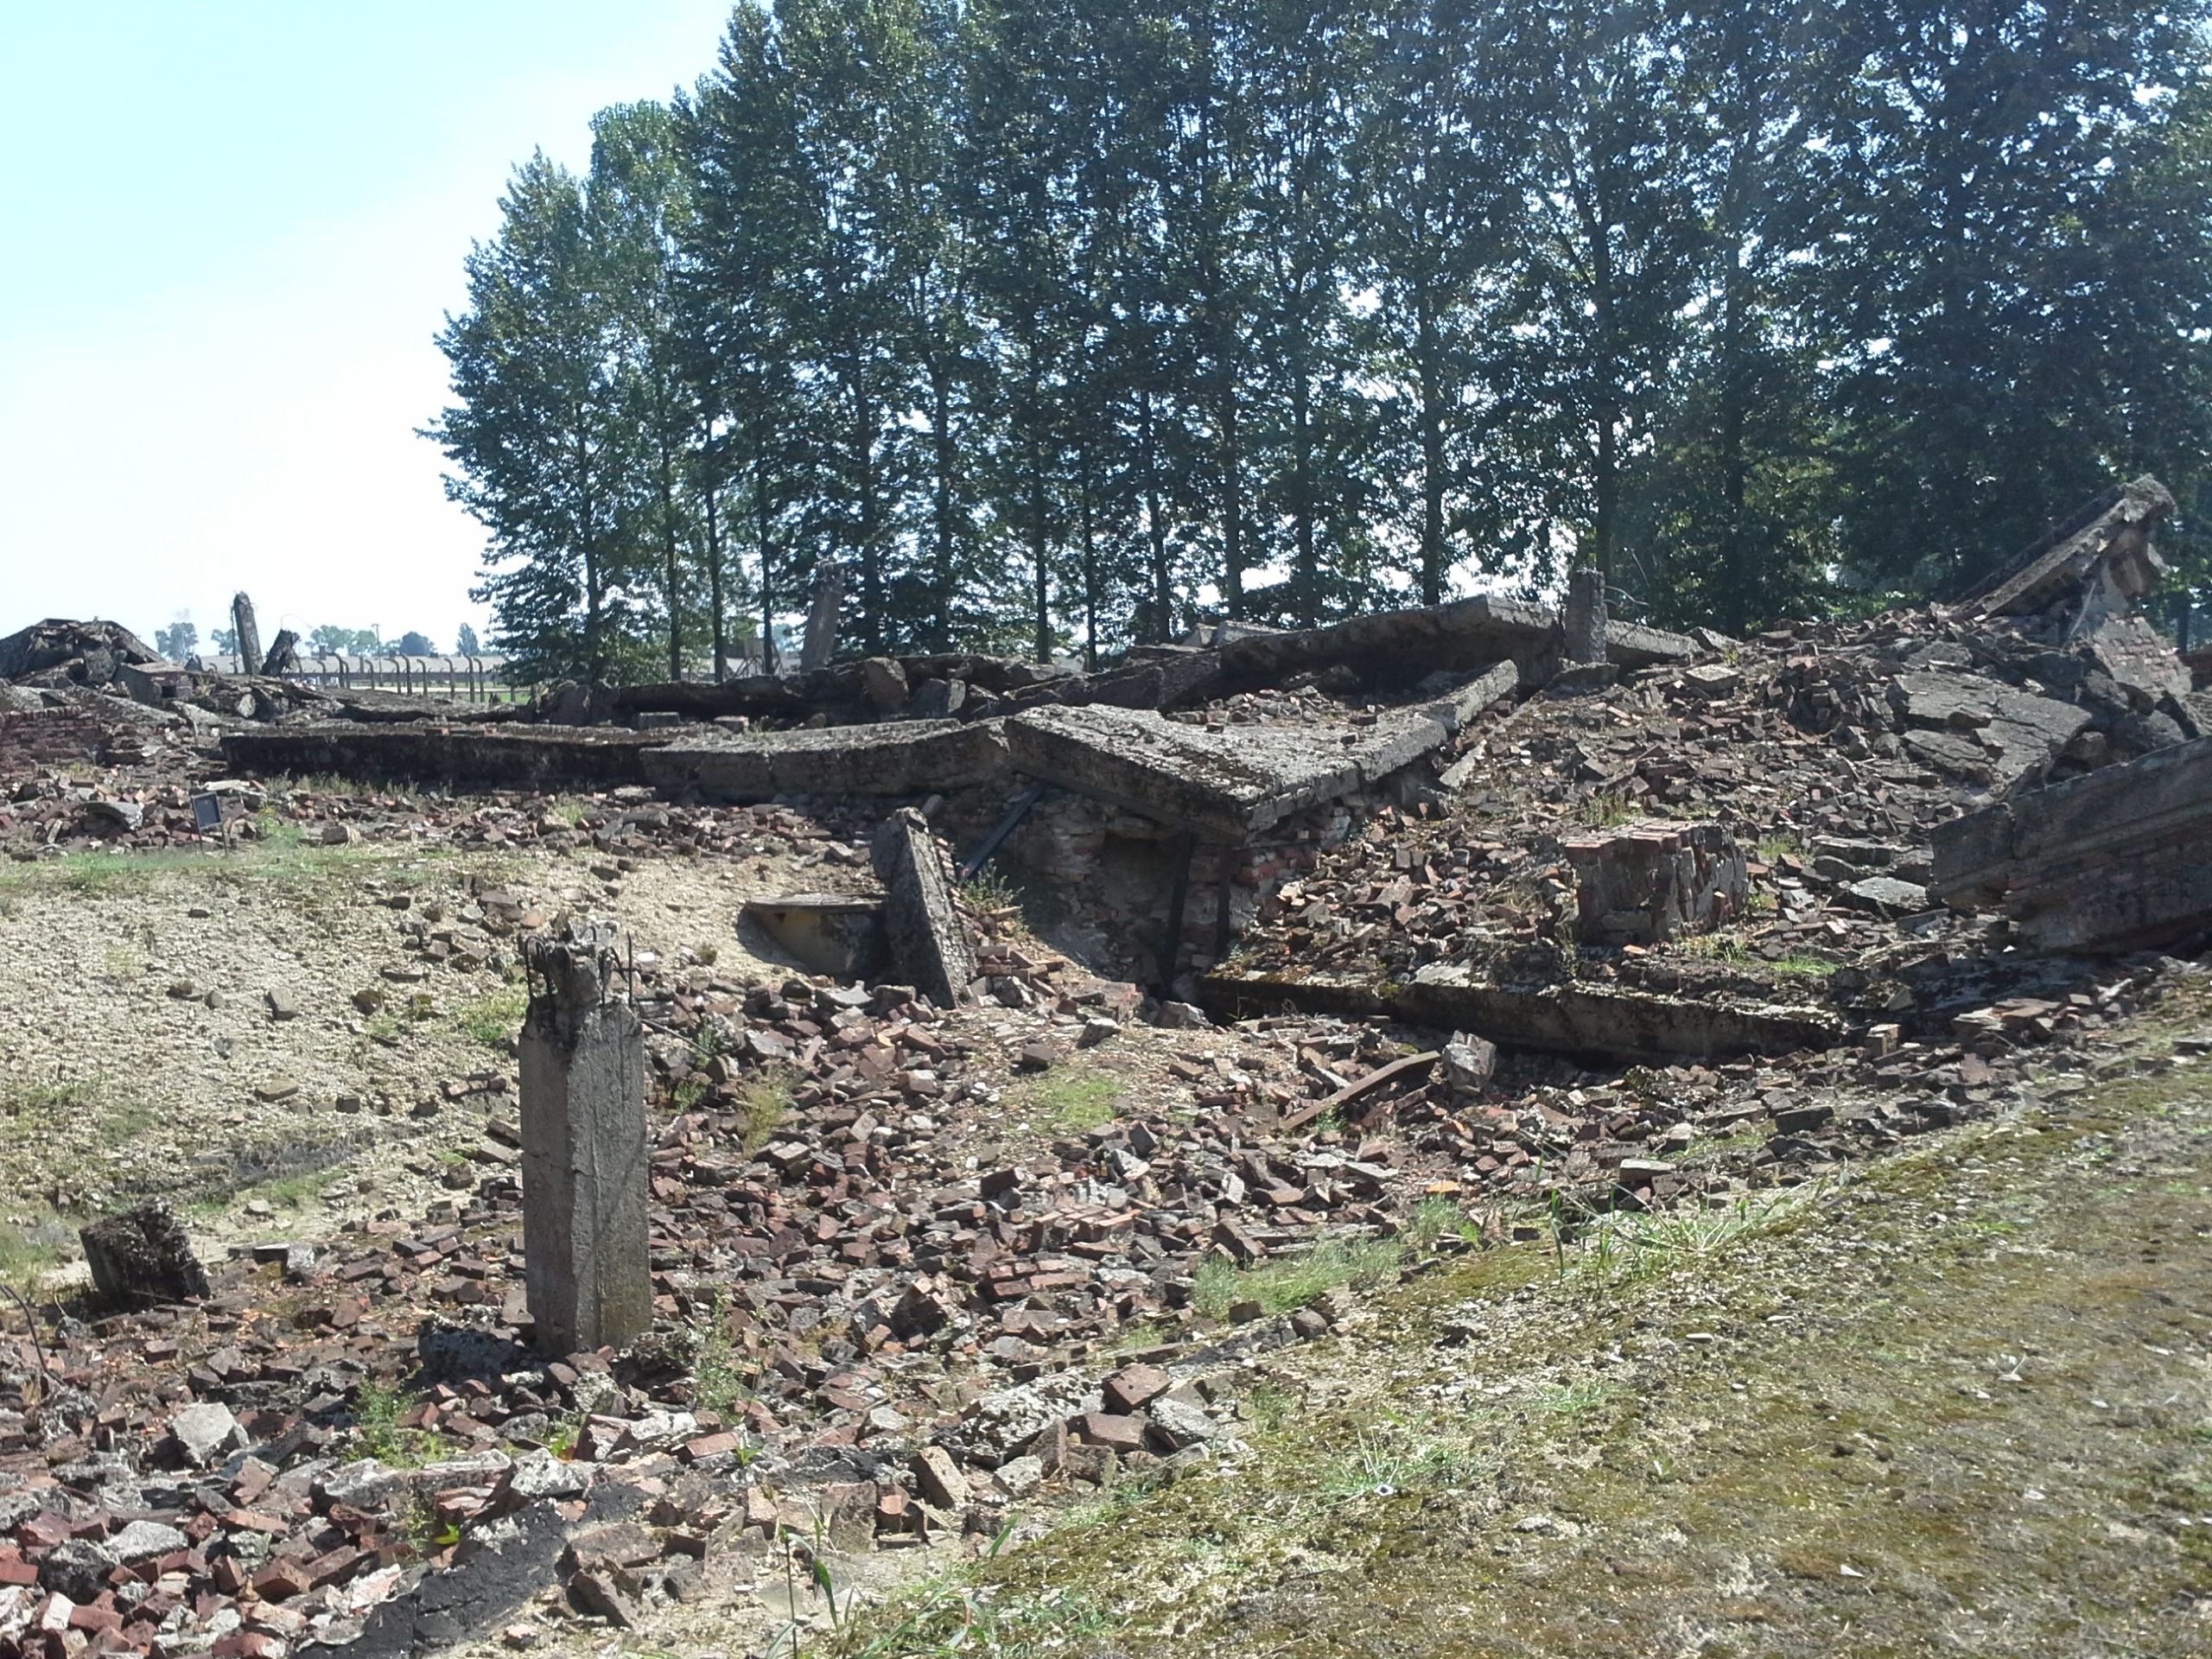 Ruins of a crematory. Birkenau had four crematories. After the victims were gassed their bodies were cremated and their ashes dumped in nearby fields. The crematories were blown up by the German authorities shortly before the camp was evacuated in January 1945.